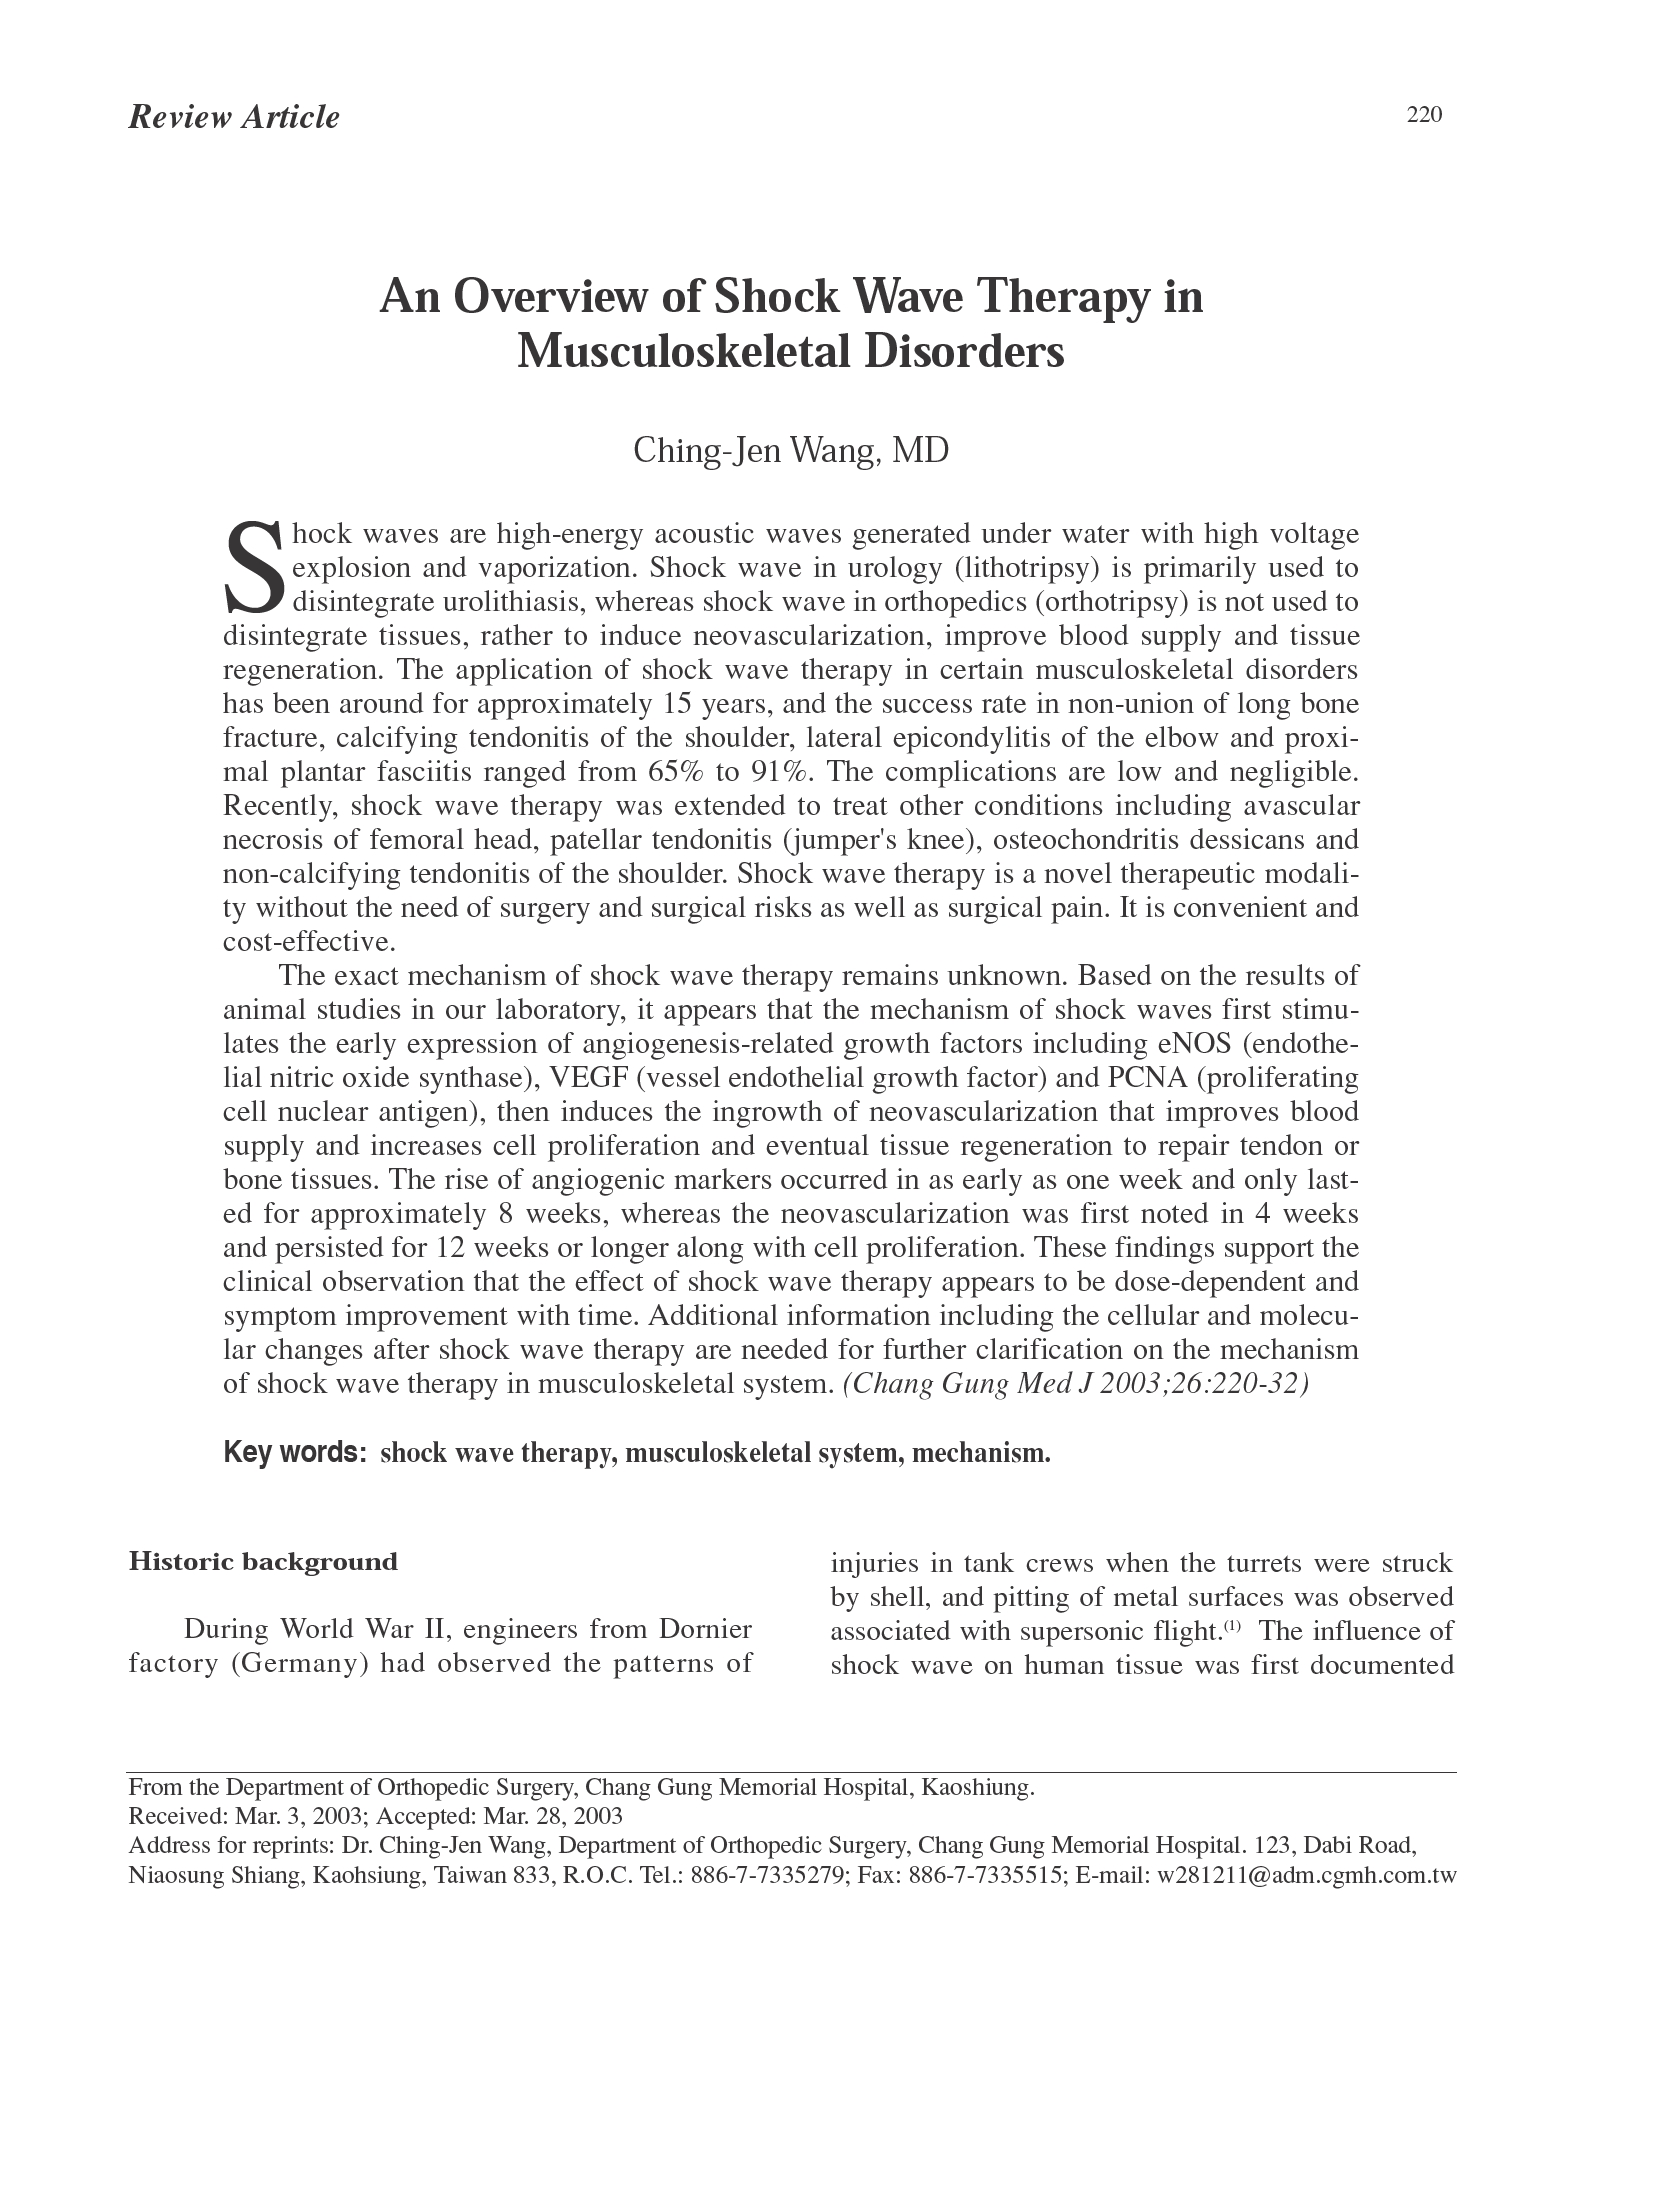 An Overview of Shockwave Therapy for Musculoskeletal Disorders MOST POPULAR READ PAPER